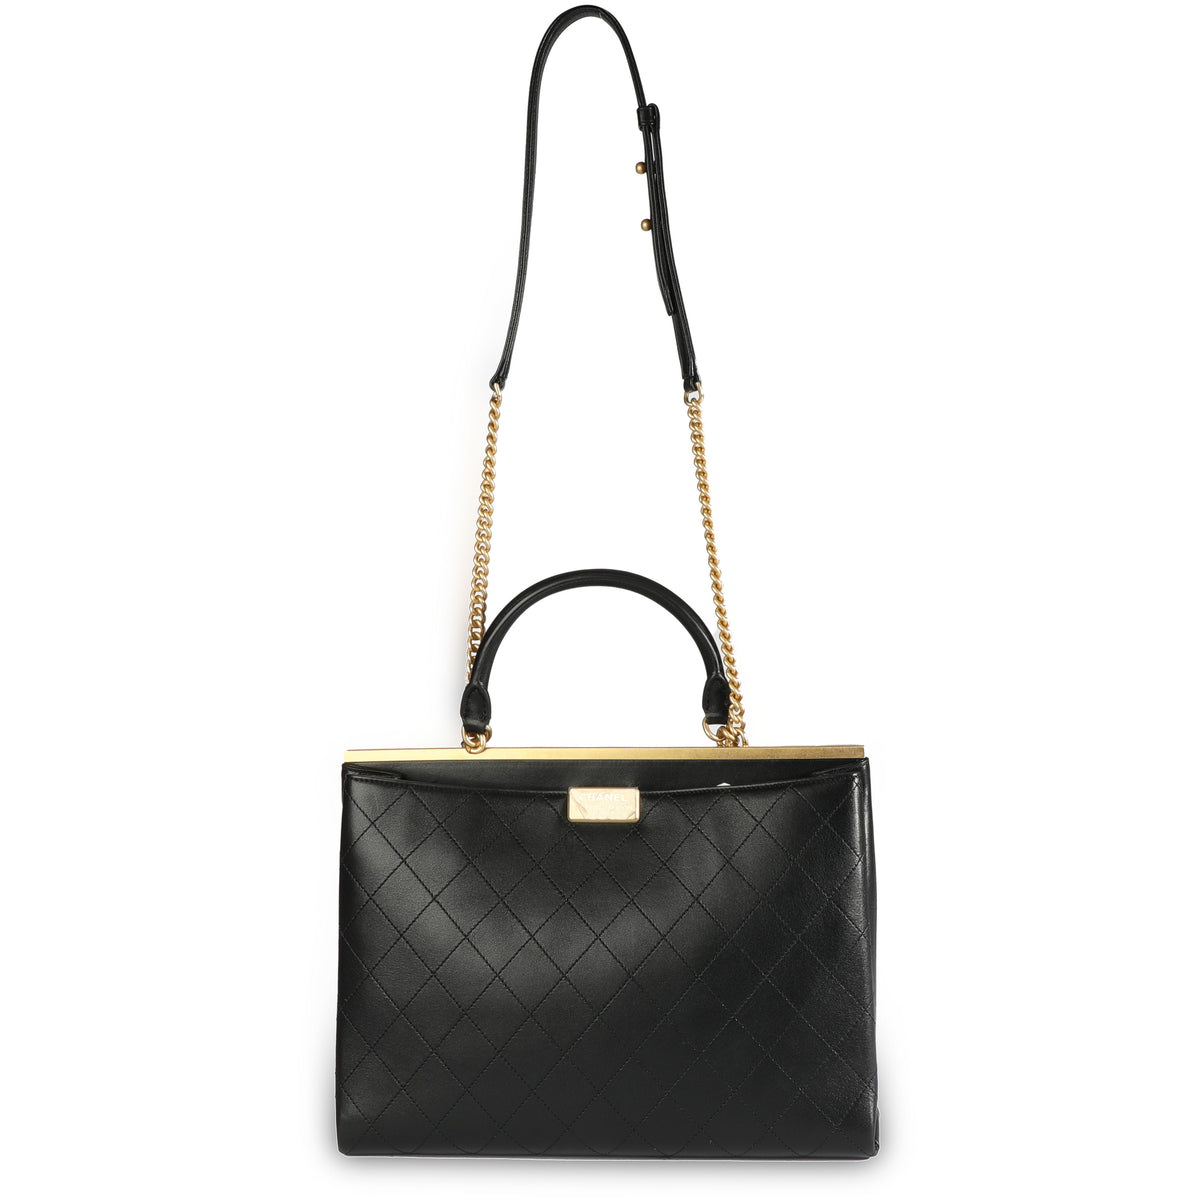 Chanel Black Quilted Calfskin Coco Luxe Large Shopping Bag